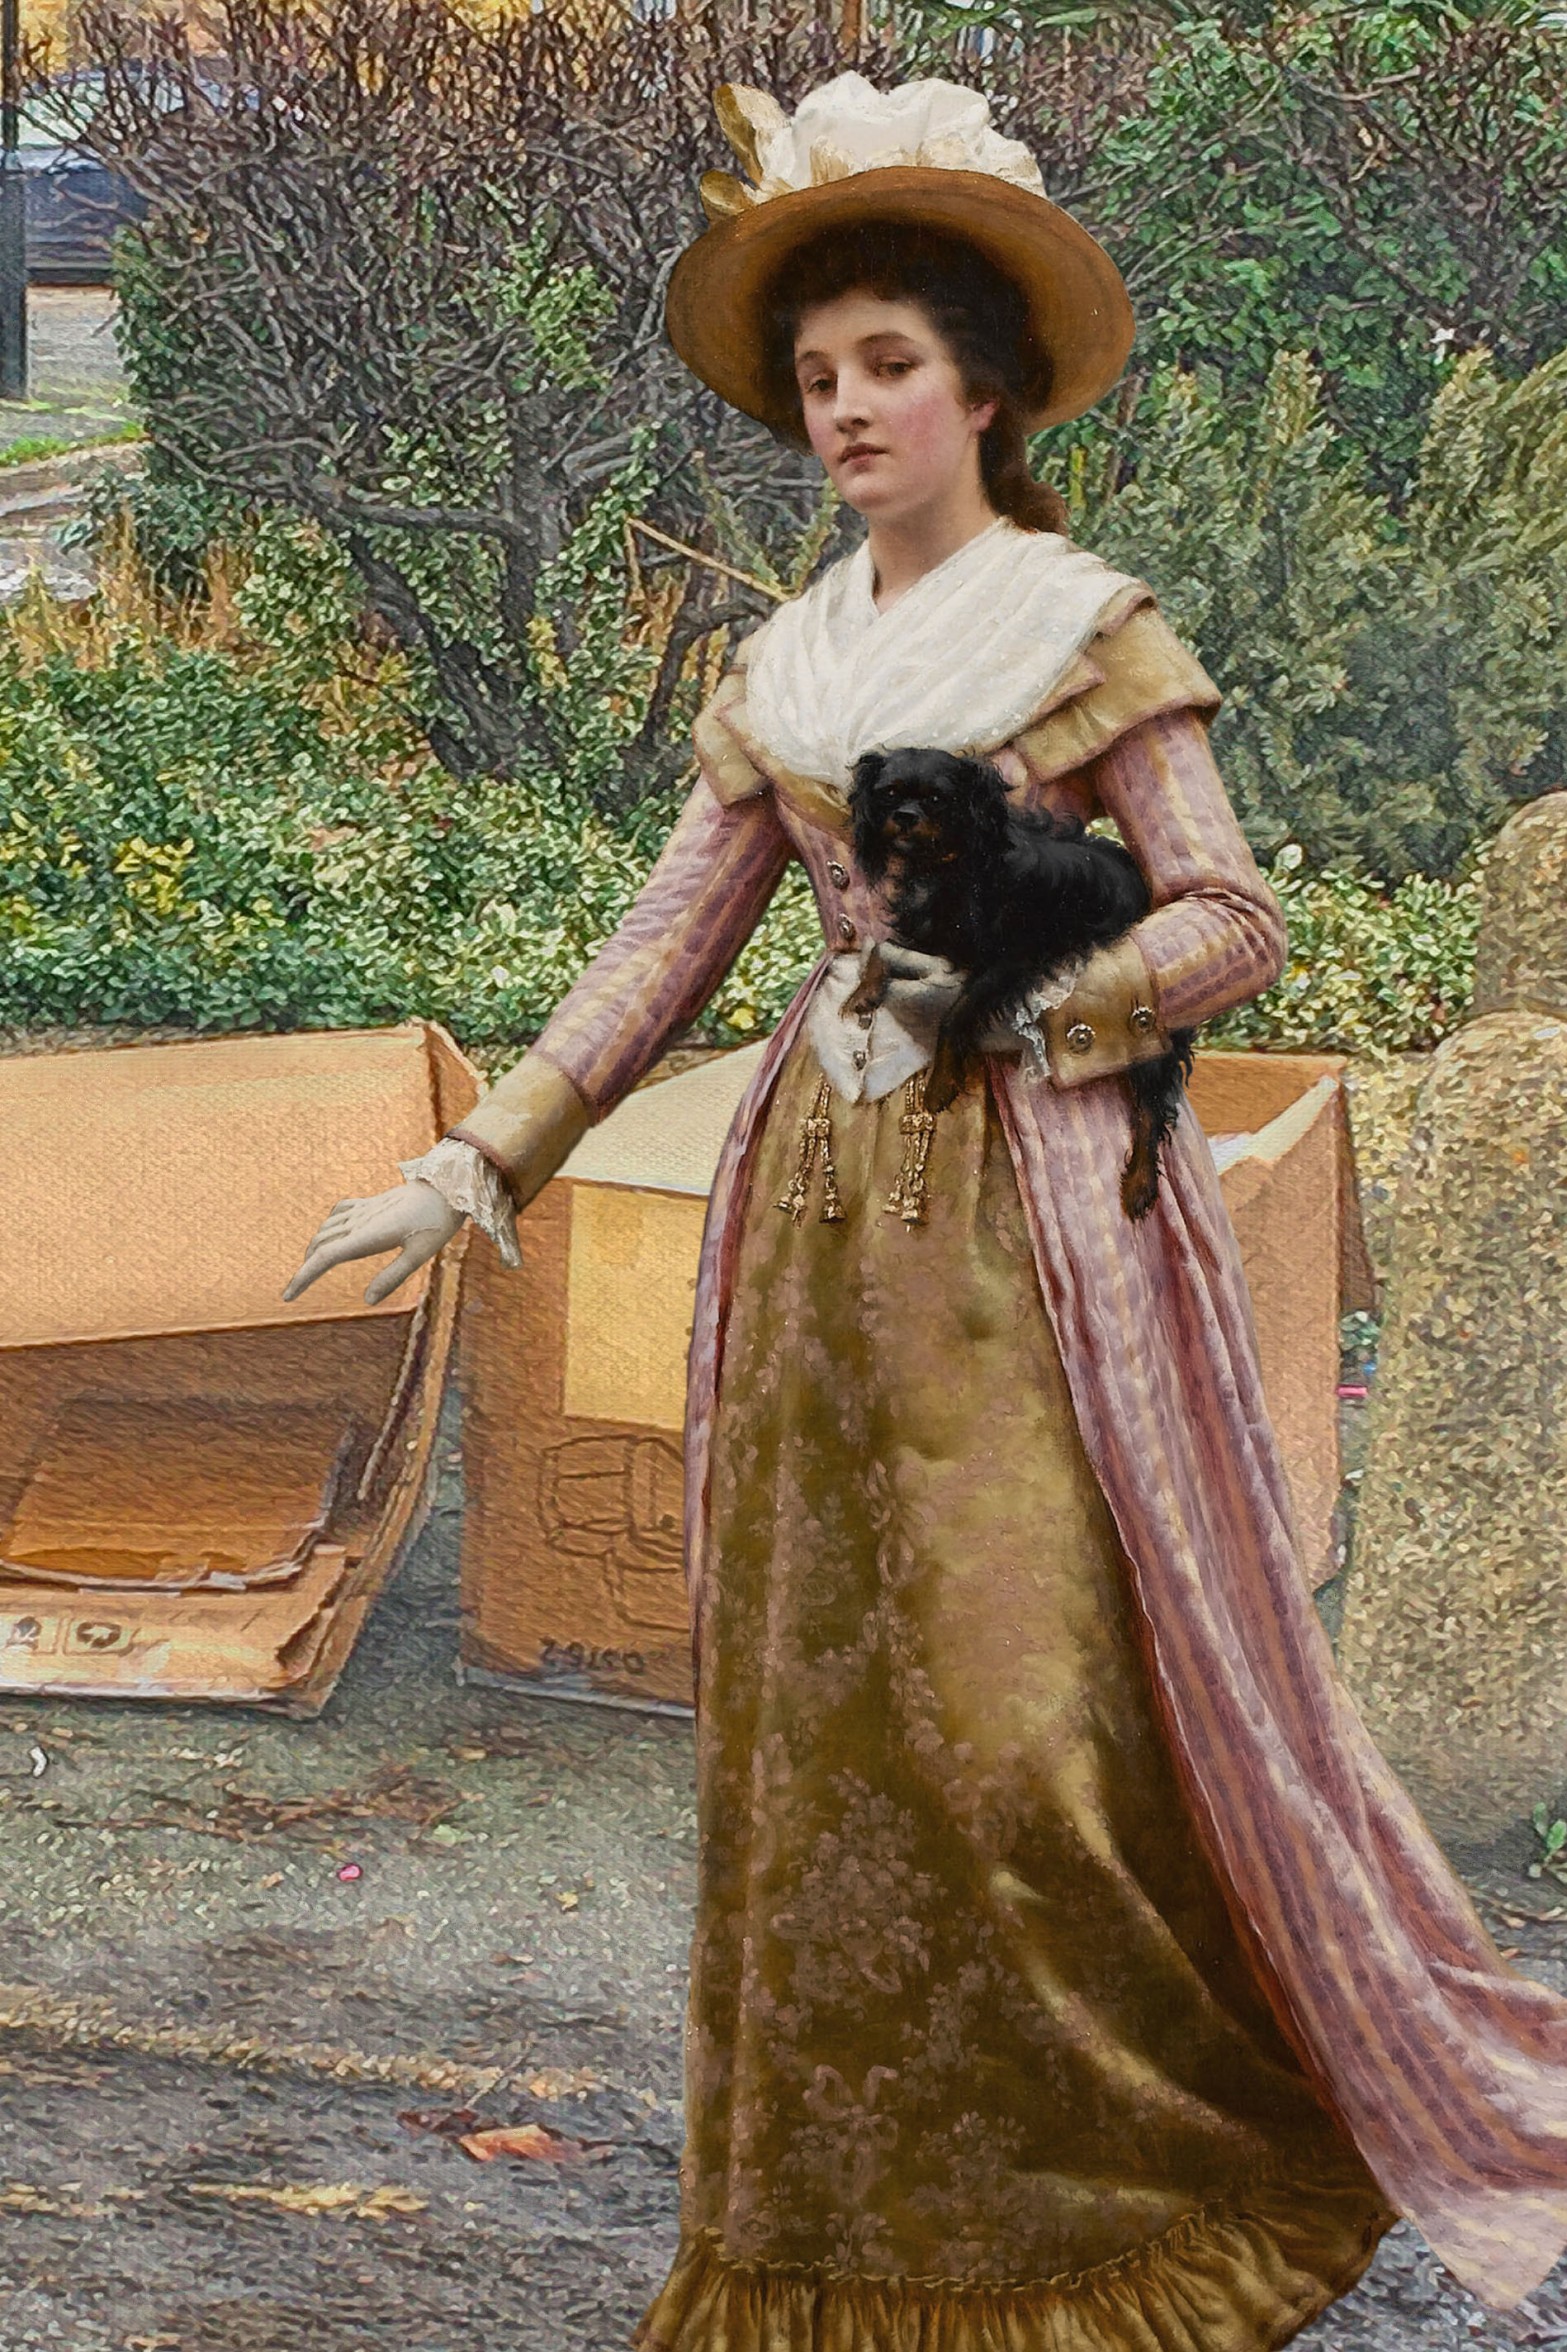 Woman holding a dog from Edmund Blair Leighton’s “My Next Door Neighbour” (1894) walks past the recycling bins on Grove Street in Deptford